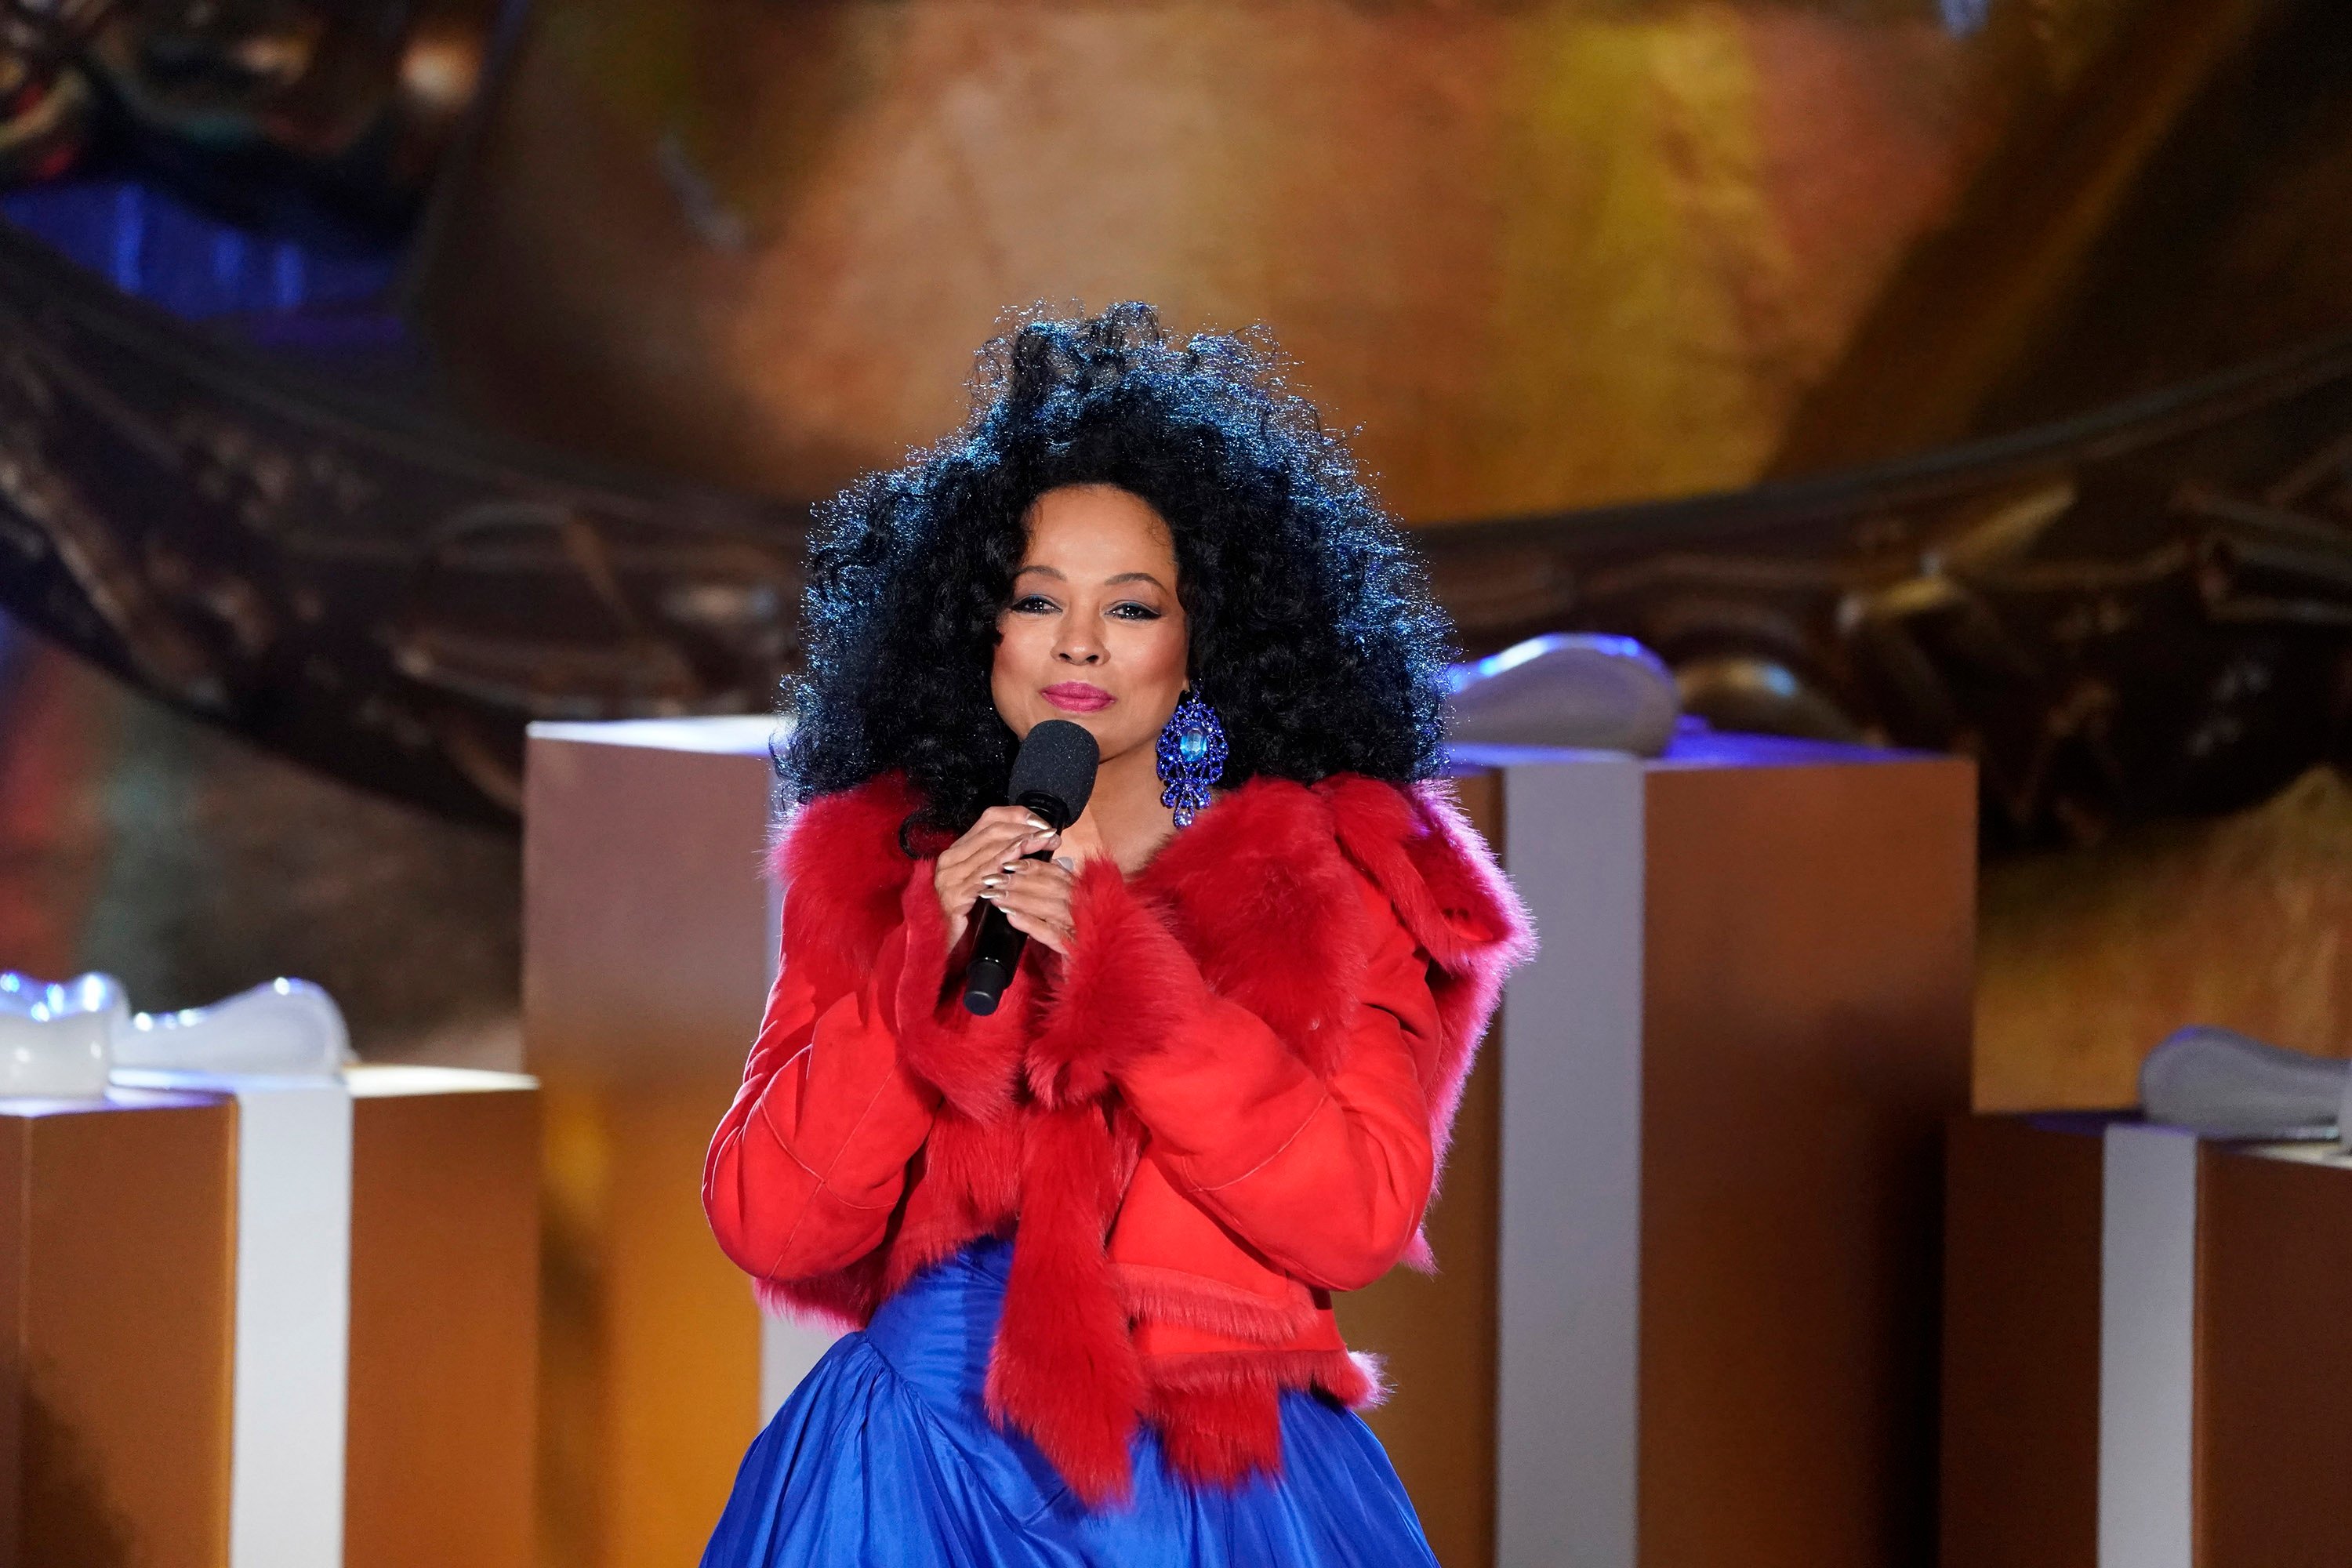 Diana Ross wearing a blue dress and red jacket while singing.